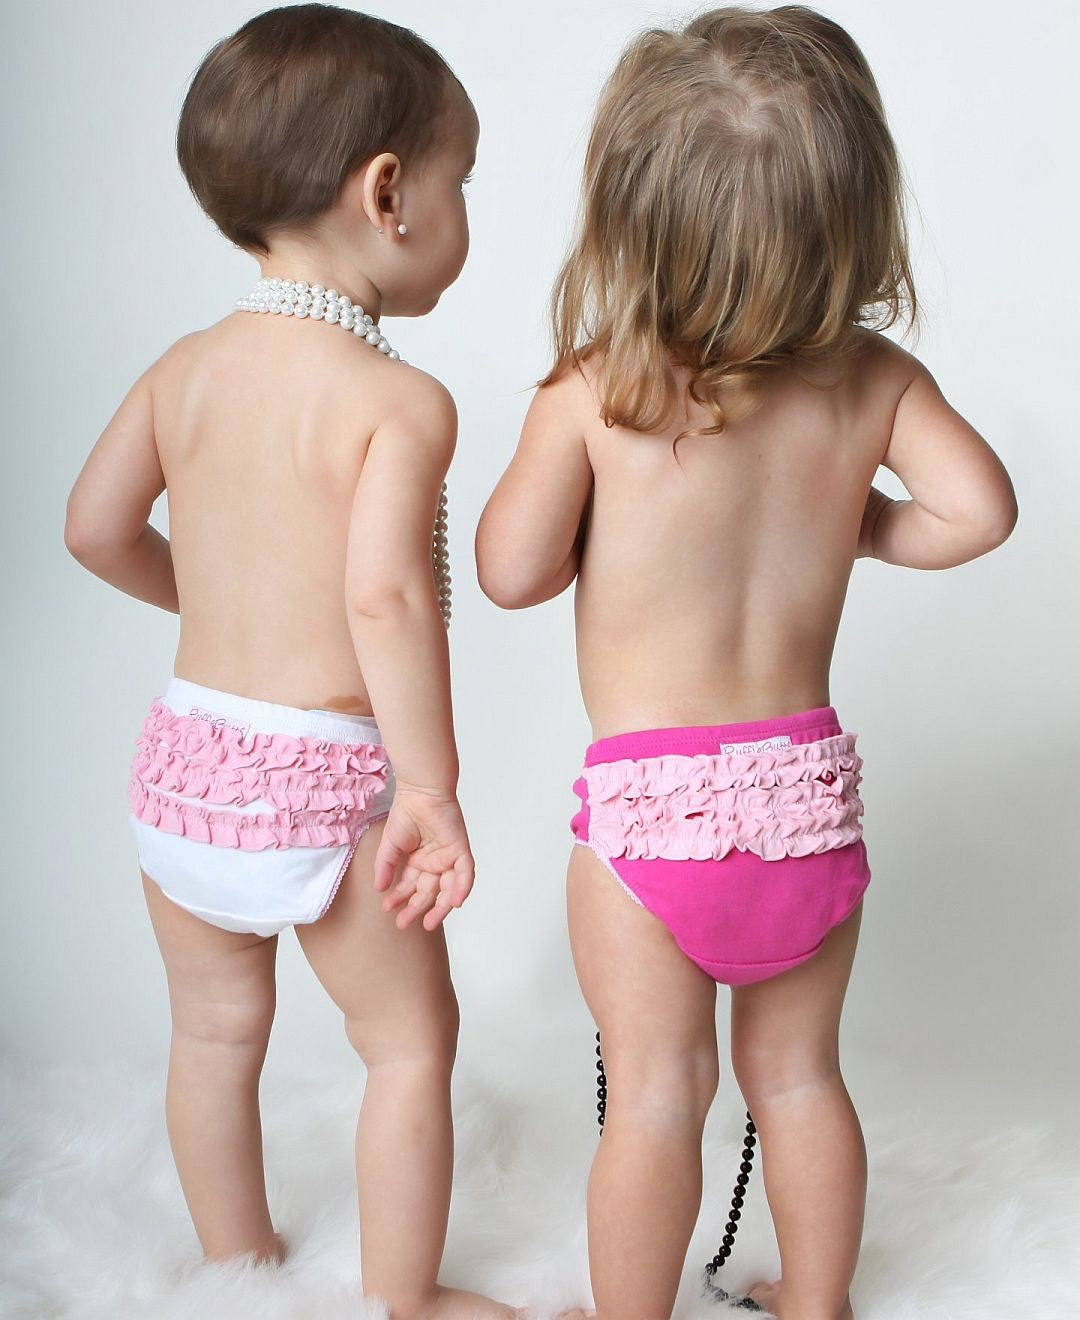 Baby girls pink frilly pants/knickers with pink bow size 6-9 mths brand new